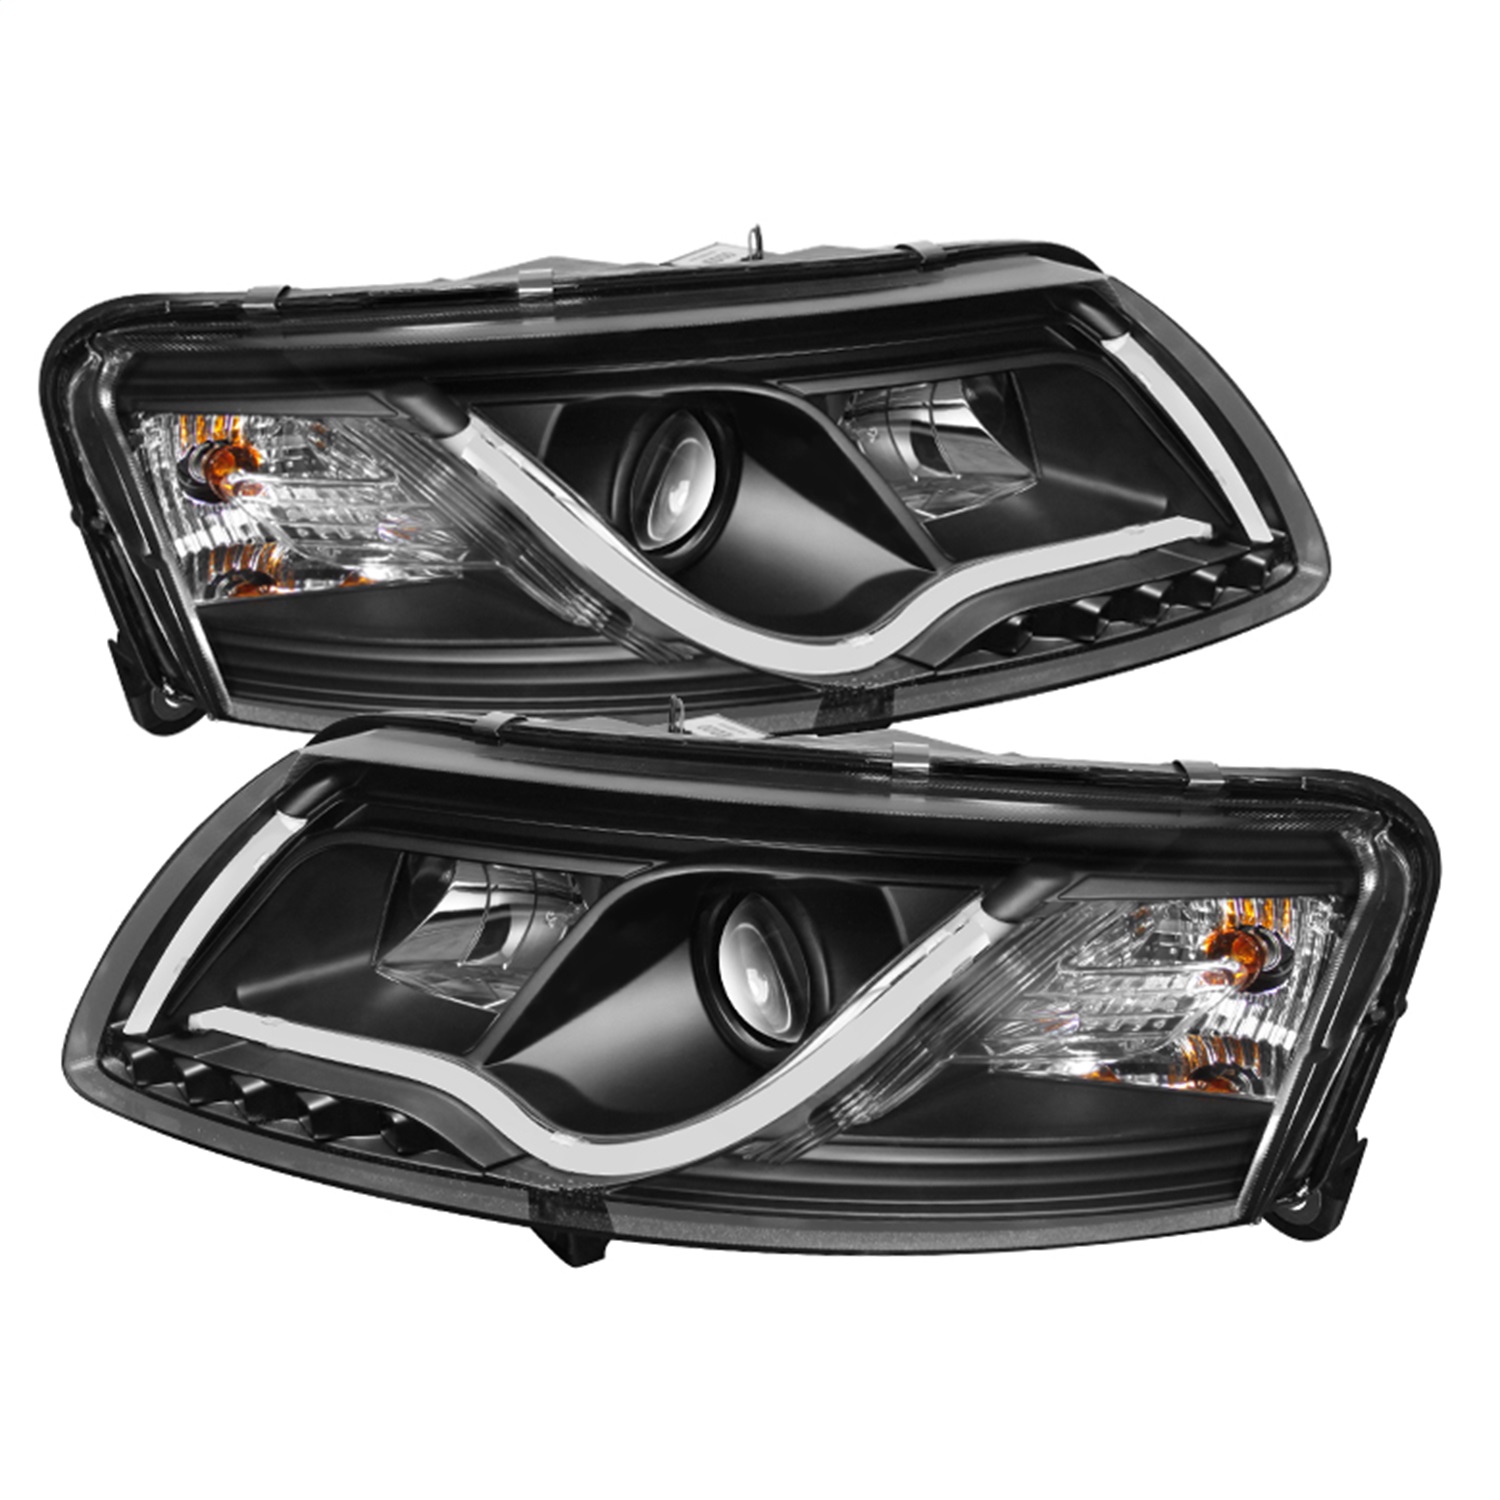 Spyder Auto 5071903 DRL LED Projector Headlights Fits 06-07 A6